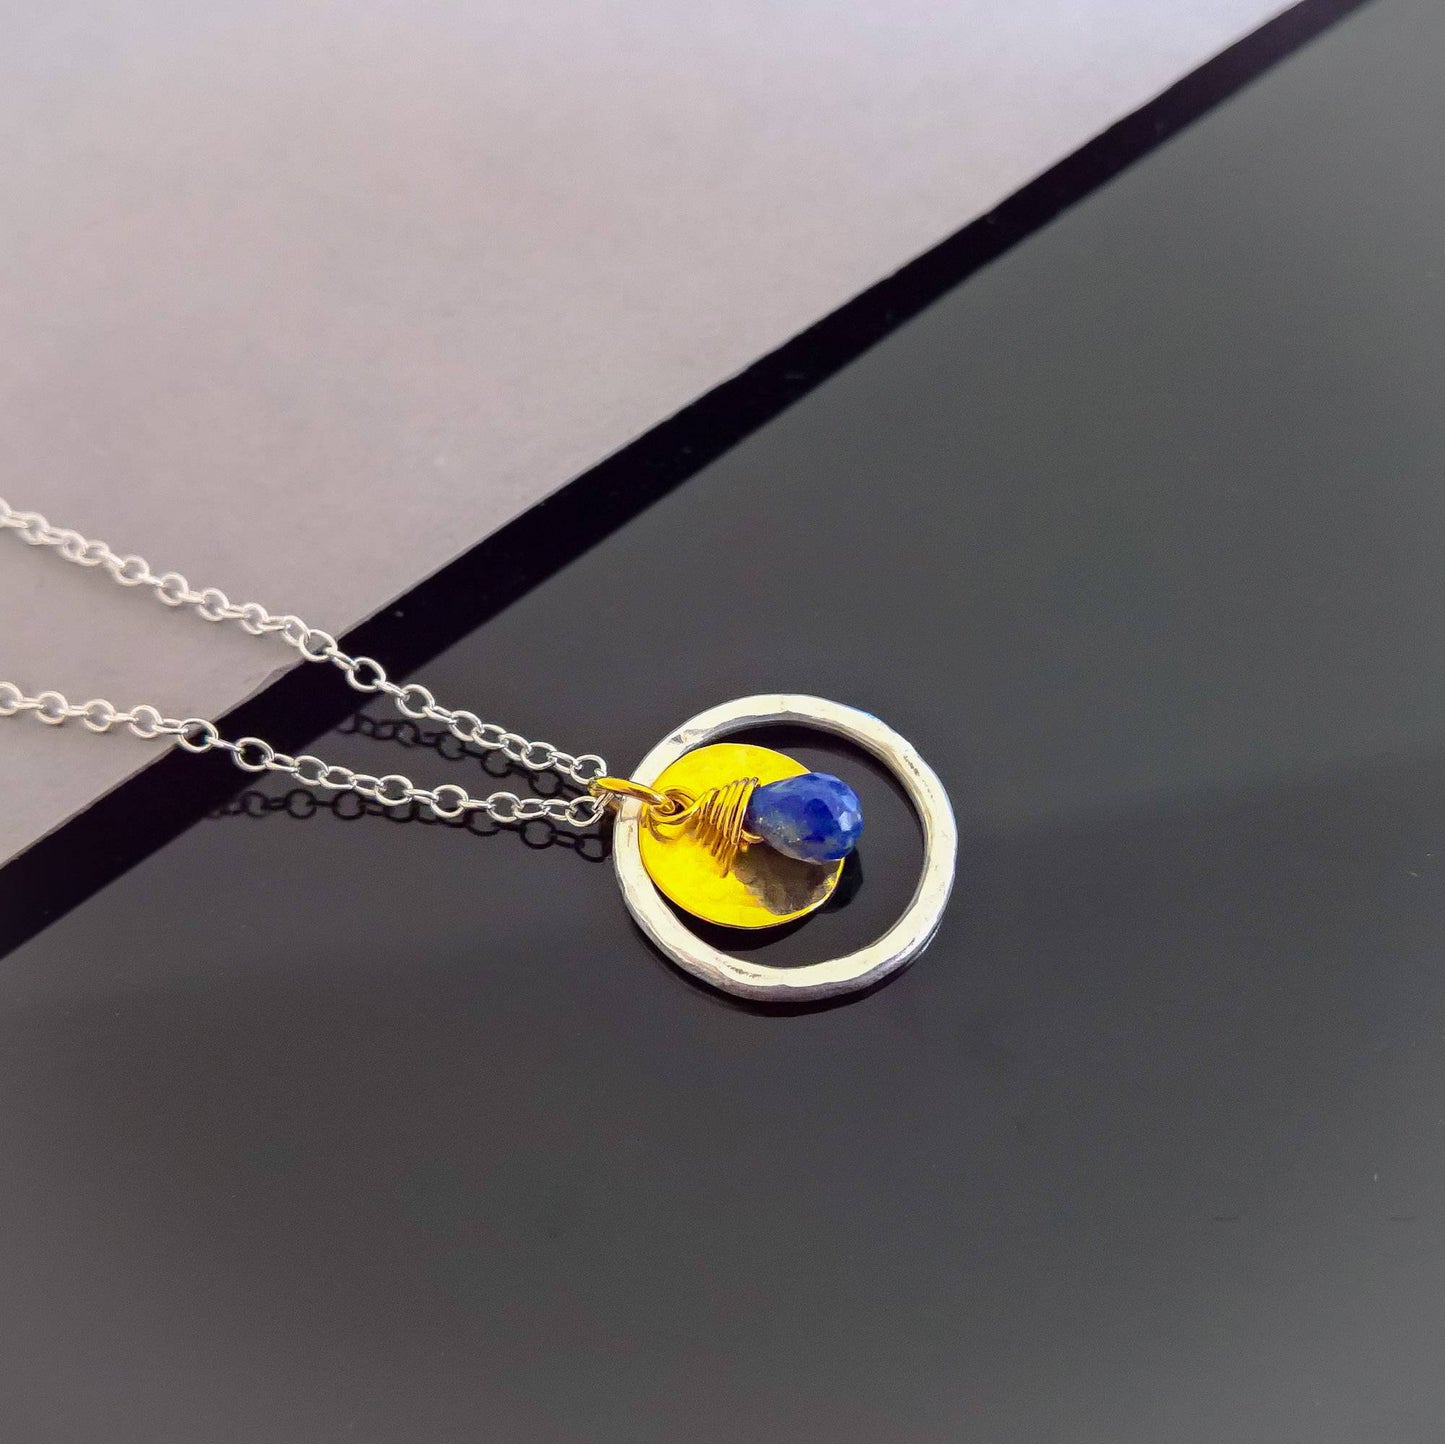 Lapis lazuli necklace sterling silver circle necklace